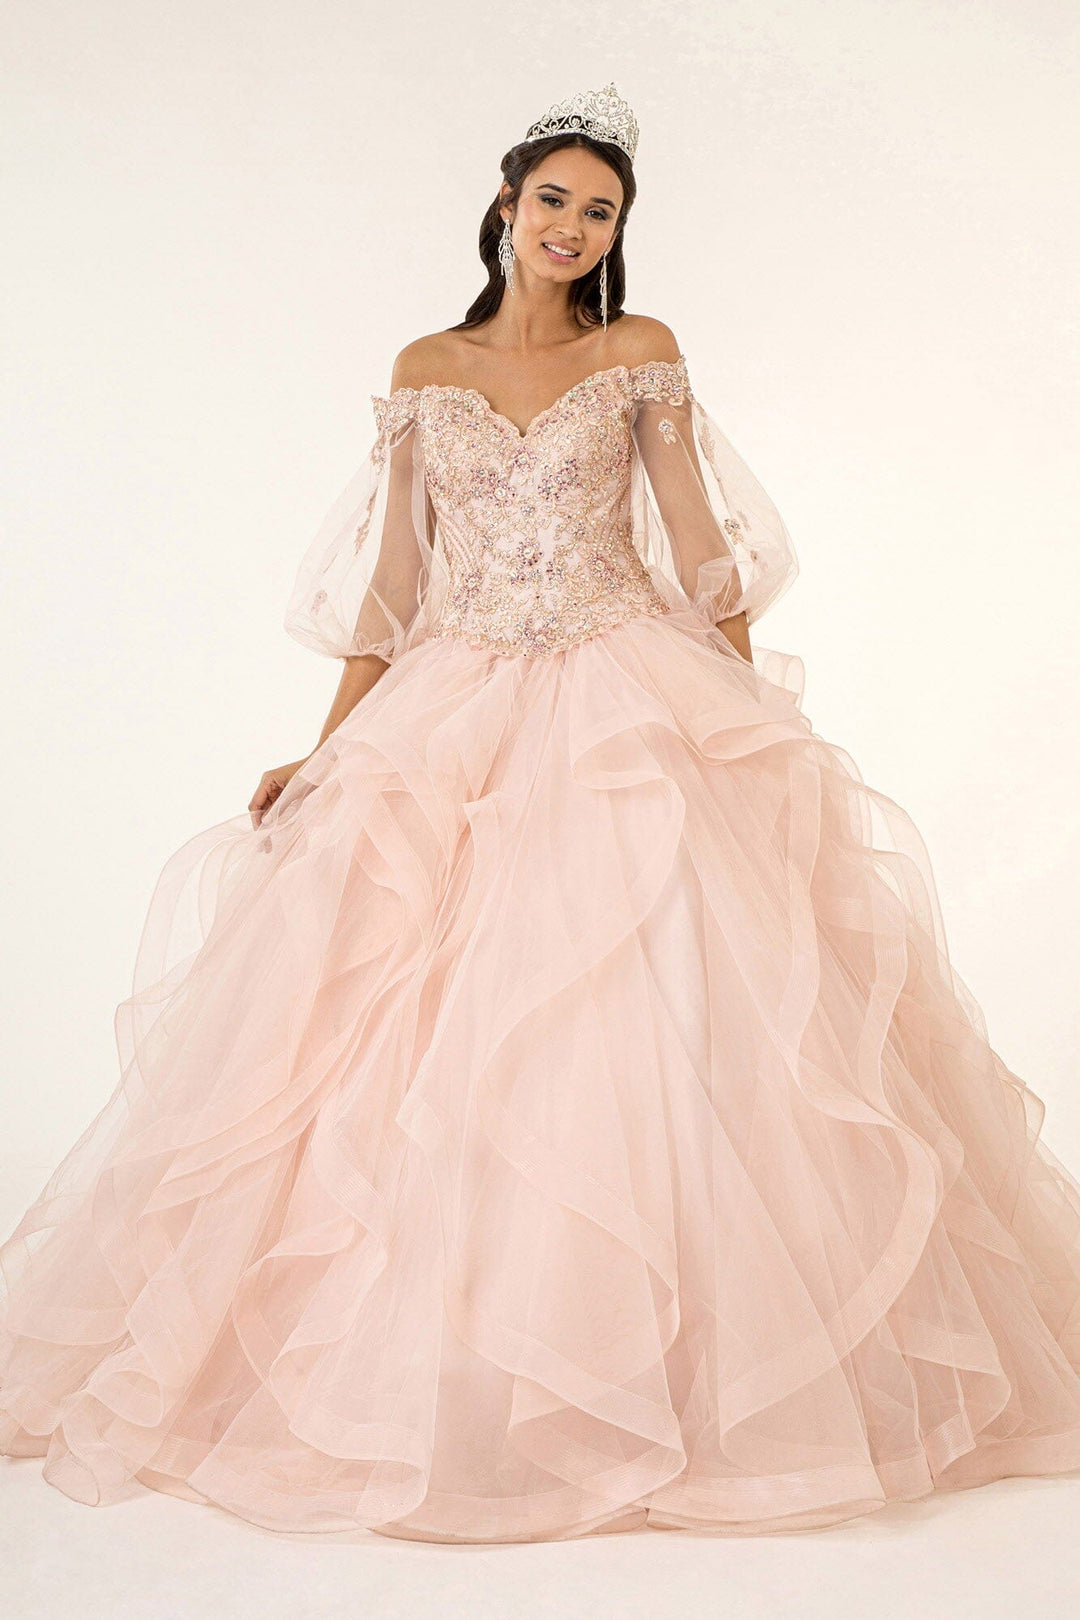 Off the Shoulder Ball Gown with Sheer Sleeves by Elizabeth K GL2601